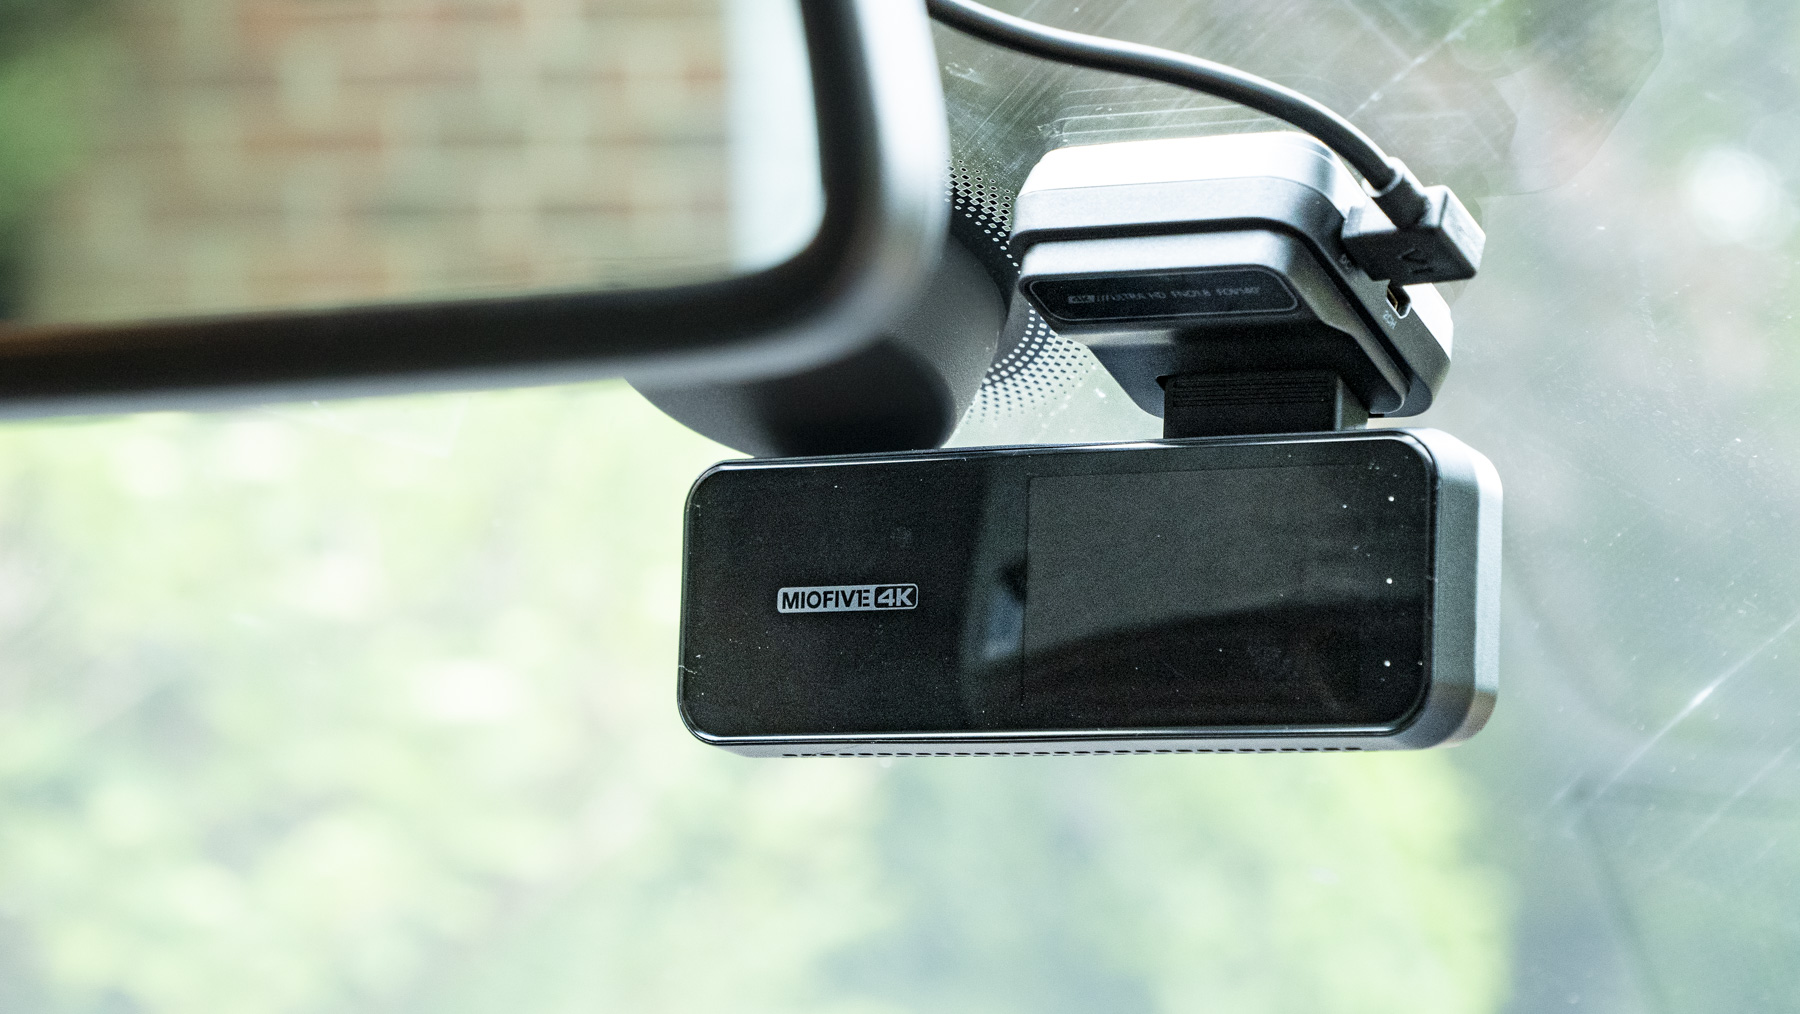 Miofive Dual Dash Cam front camera attached to a windscreen view from driver's seat